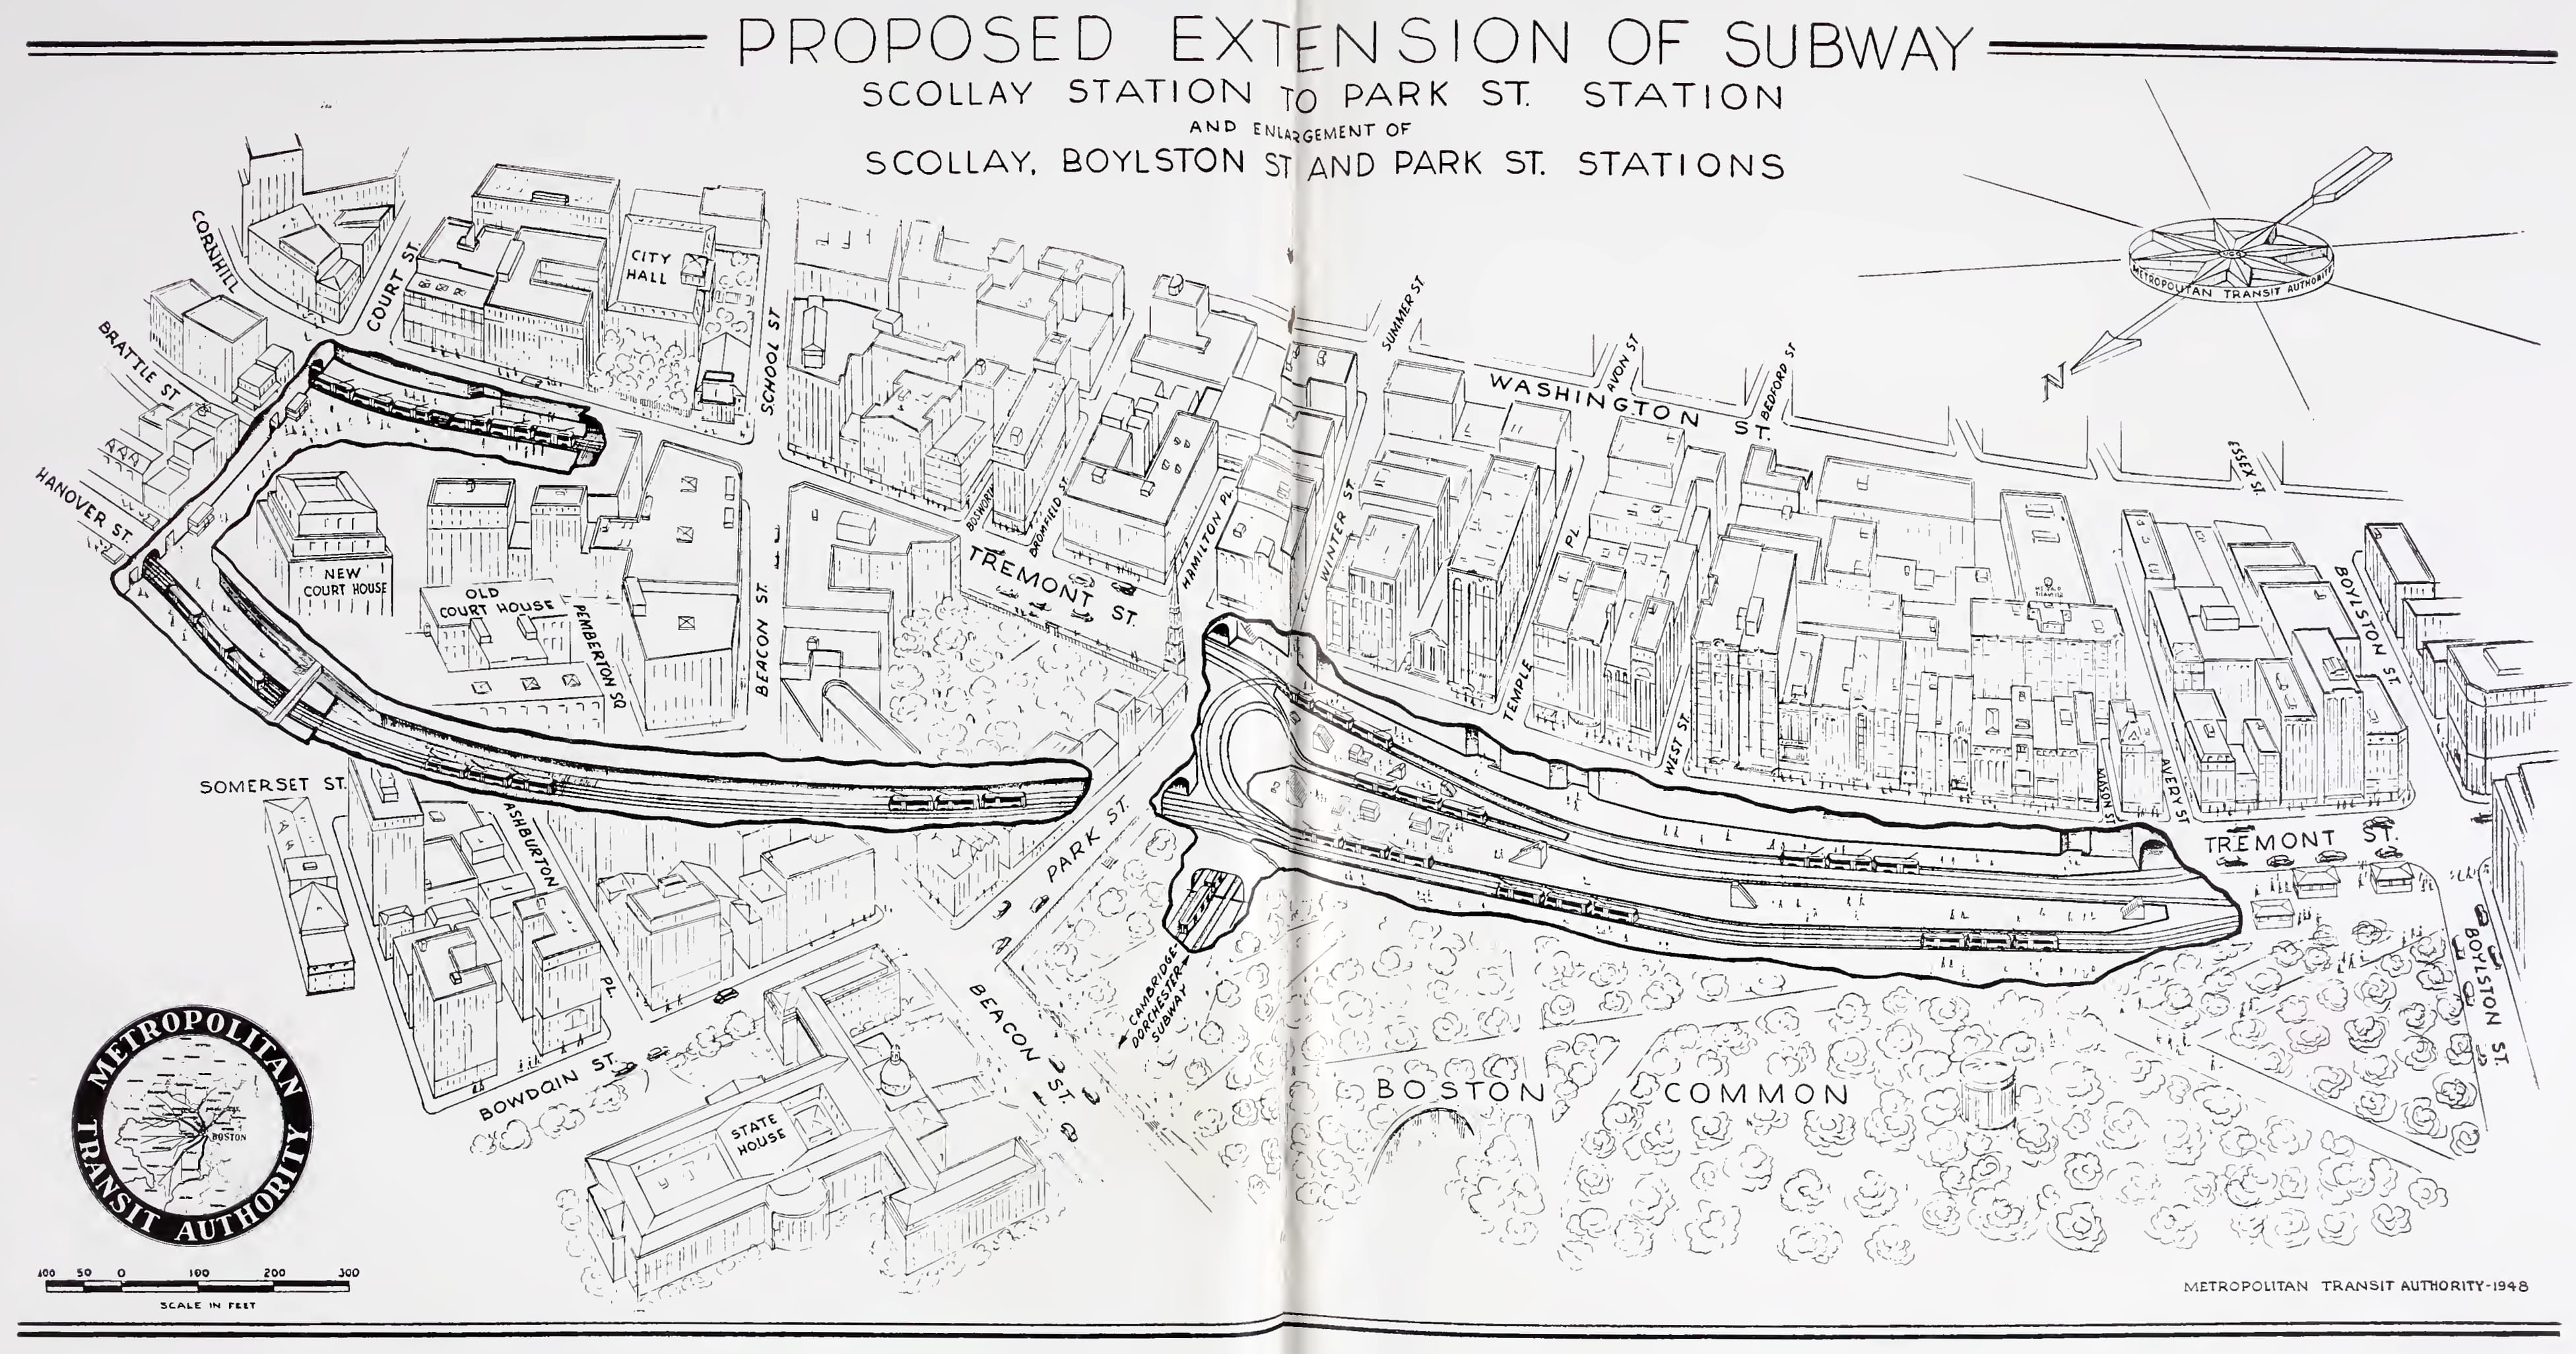 A 1947 drawing shows an extension of the subway from Scollay Square to Park Street as part of the First Annual Report of the Board of Public Trustees of the MTA